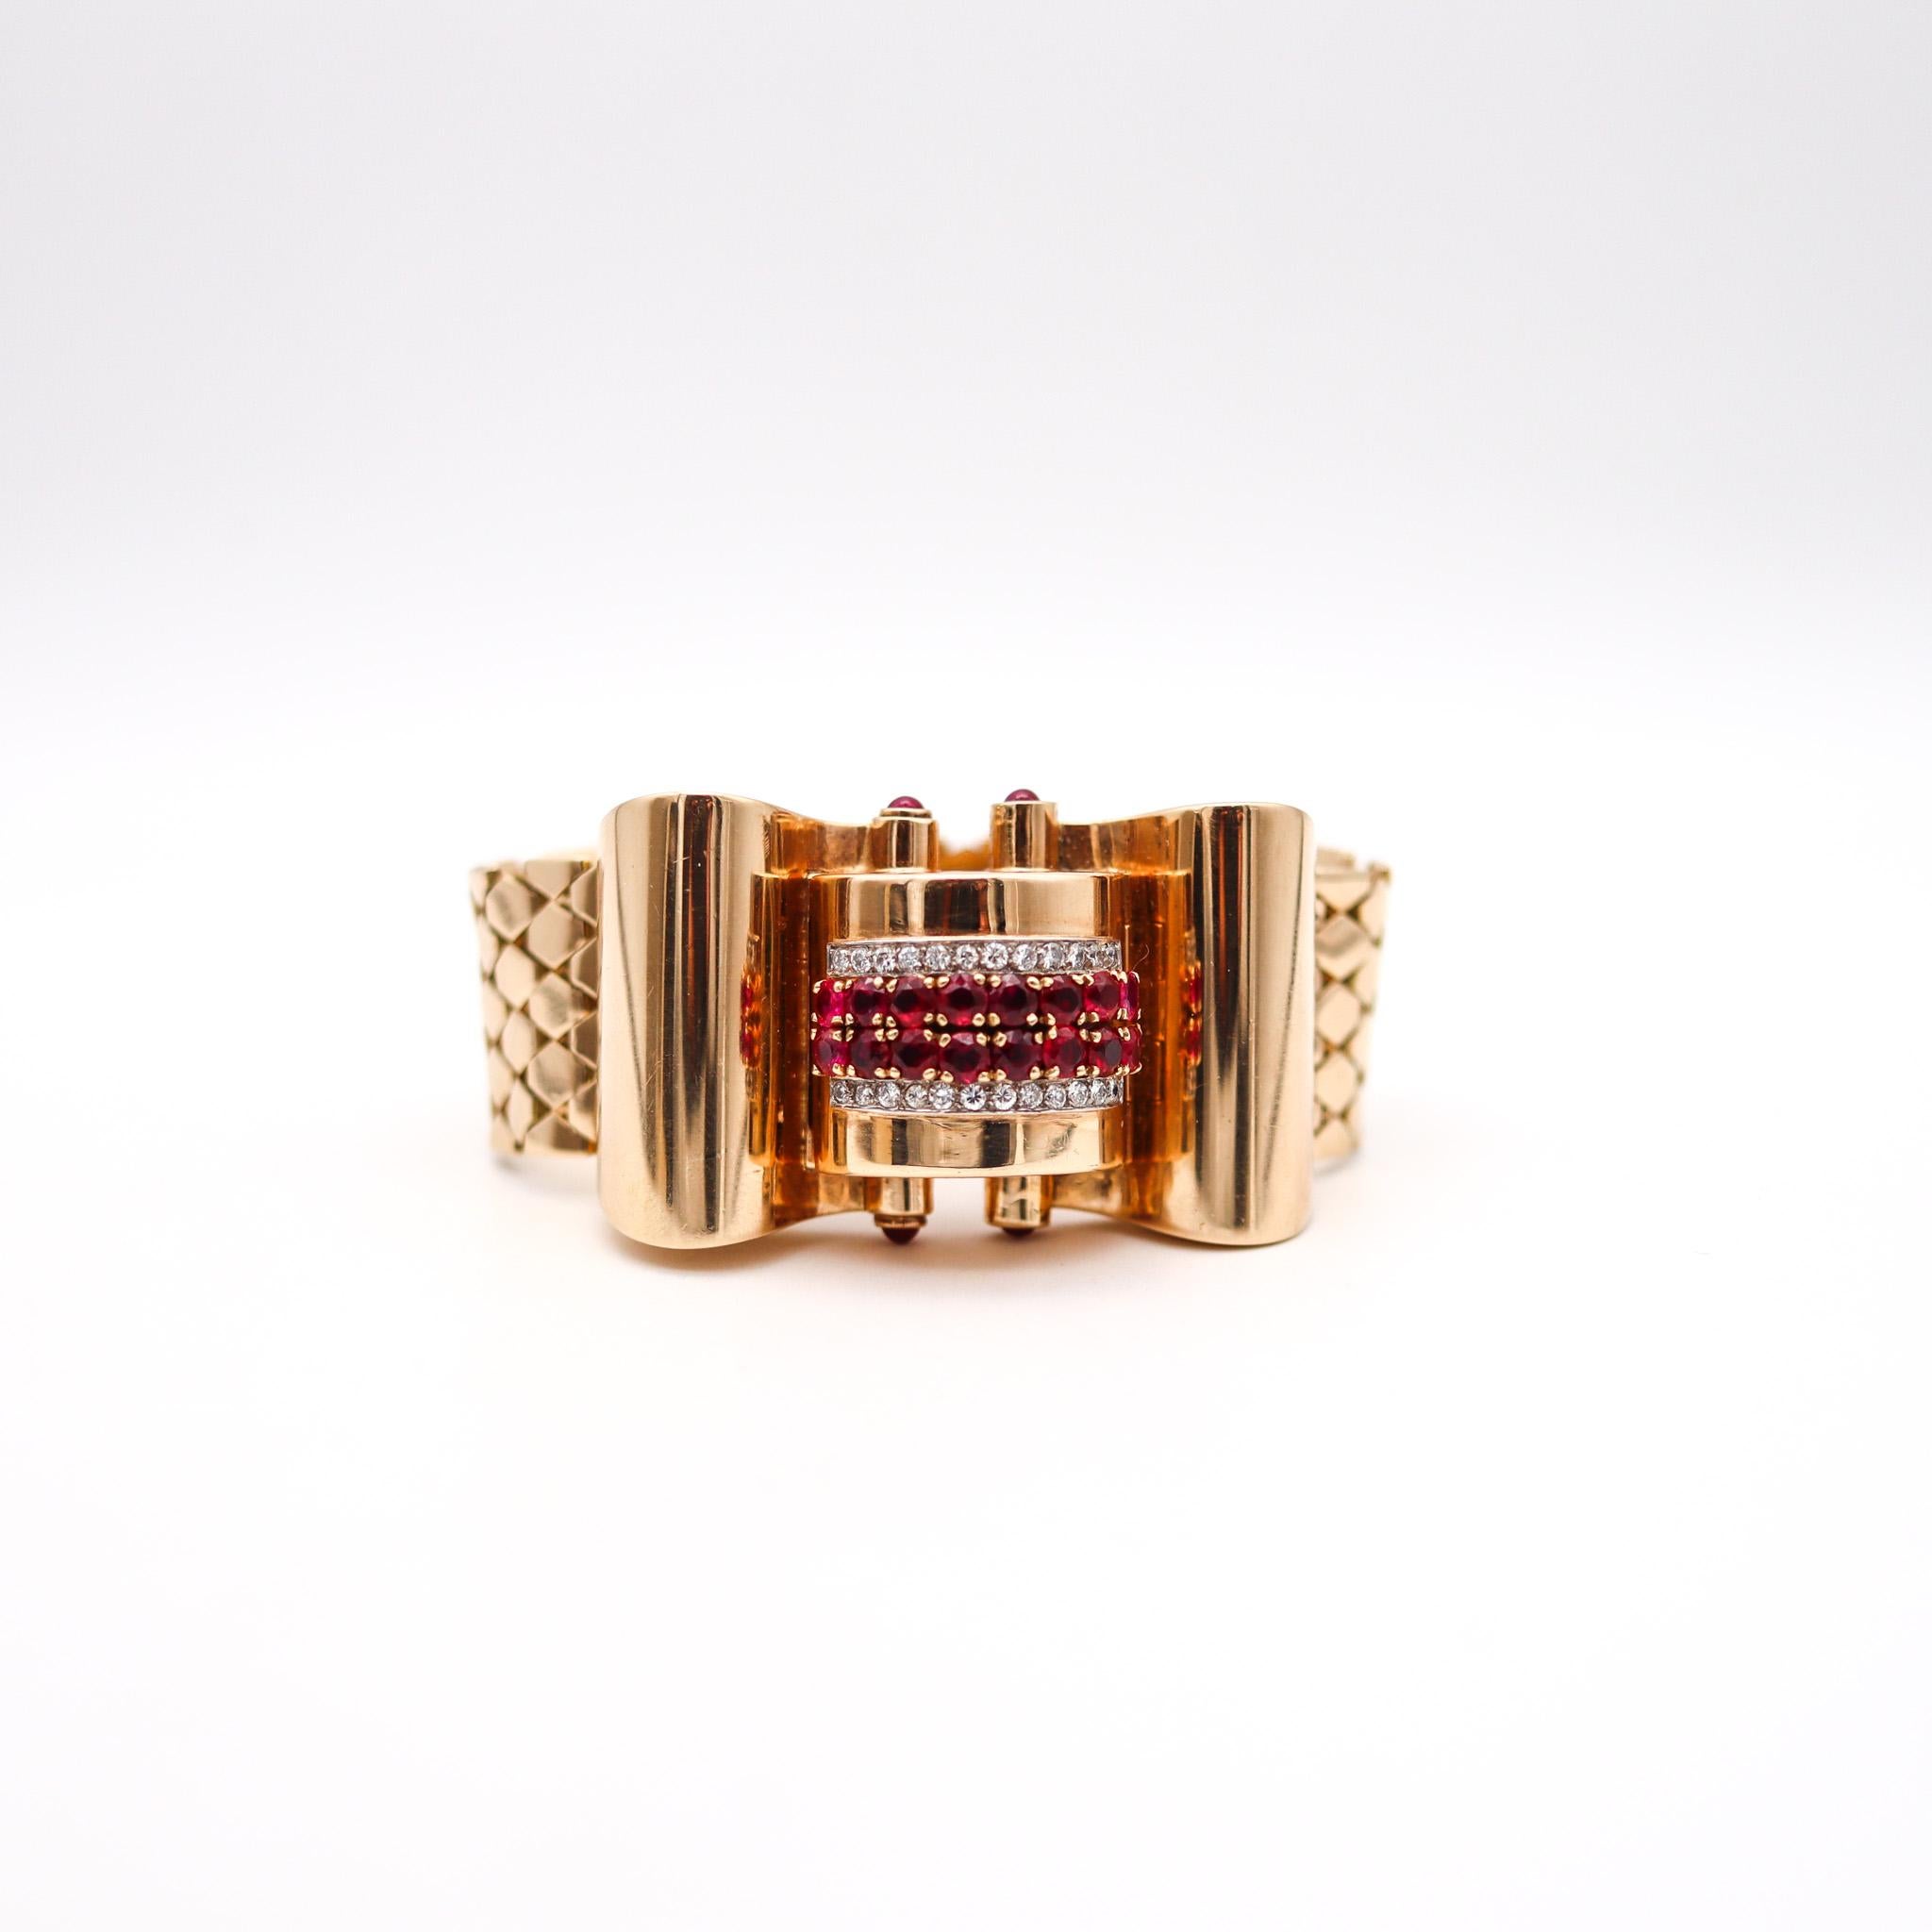 Retro Machine age geometric Wristwatch.

Fabulous ladies bracelet wristwatch, created in America during the transitional periods of the art deco and the retro, back in the late 1930's. It was designed with bold machine age geometric patterns as a